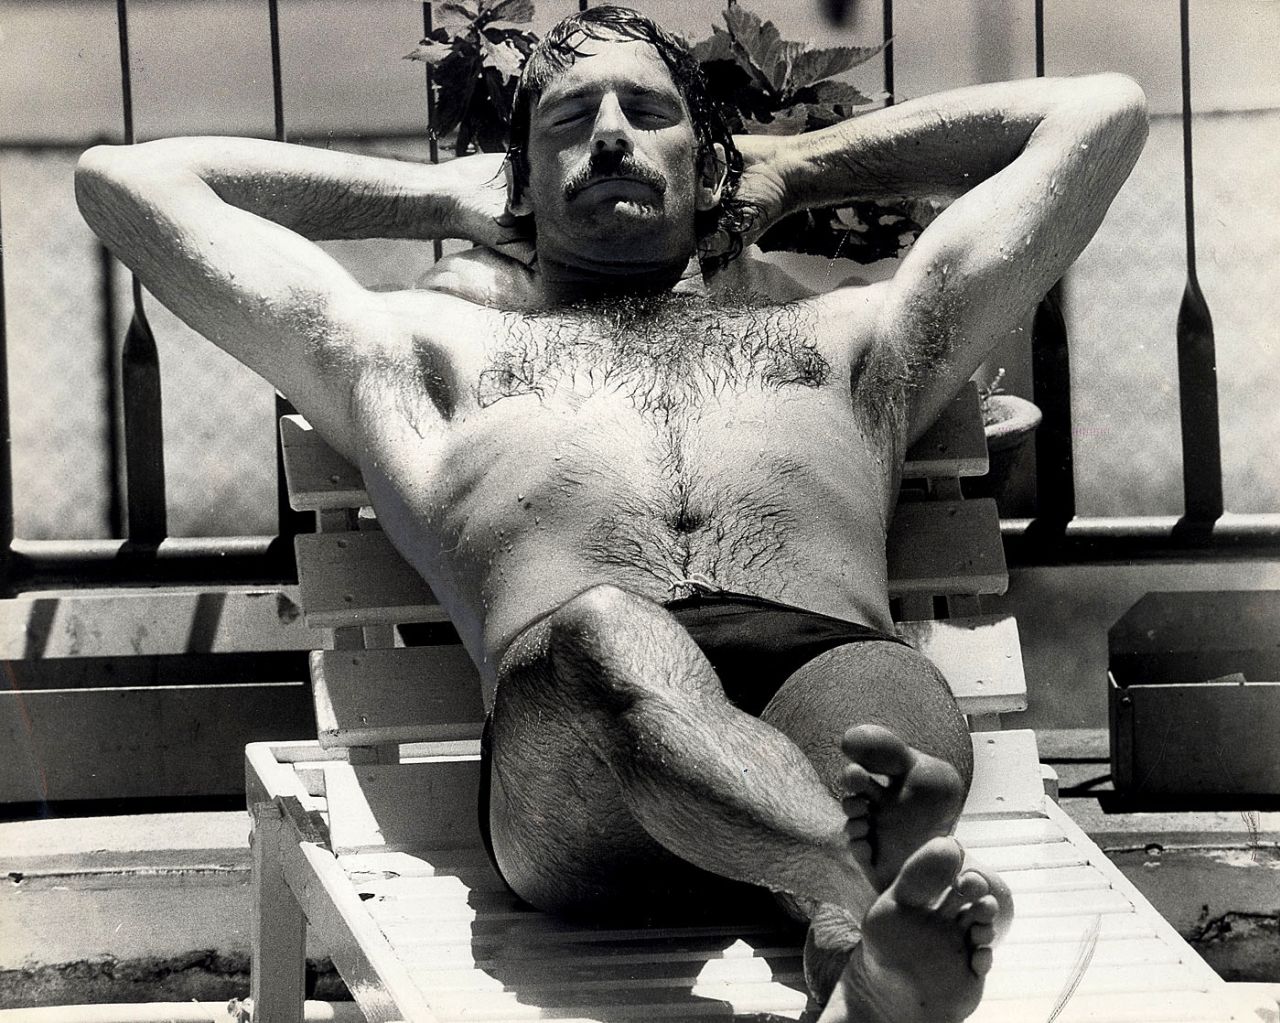 Dennis Lillee relaxes by the pool, Sydney, January 1, 1981